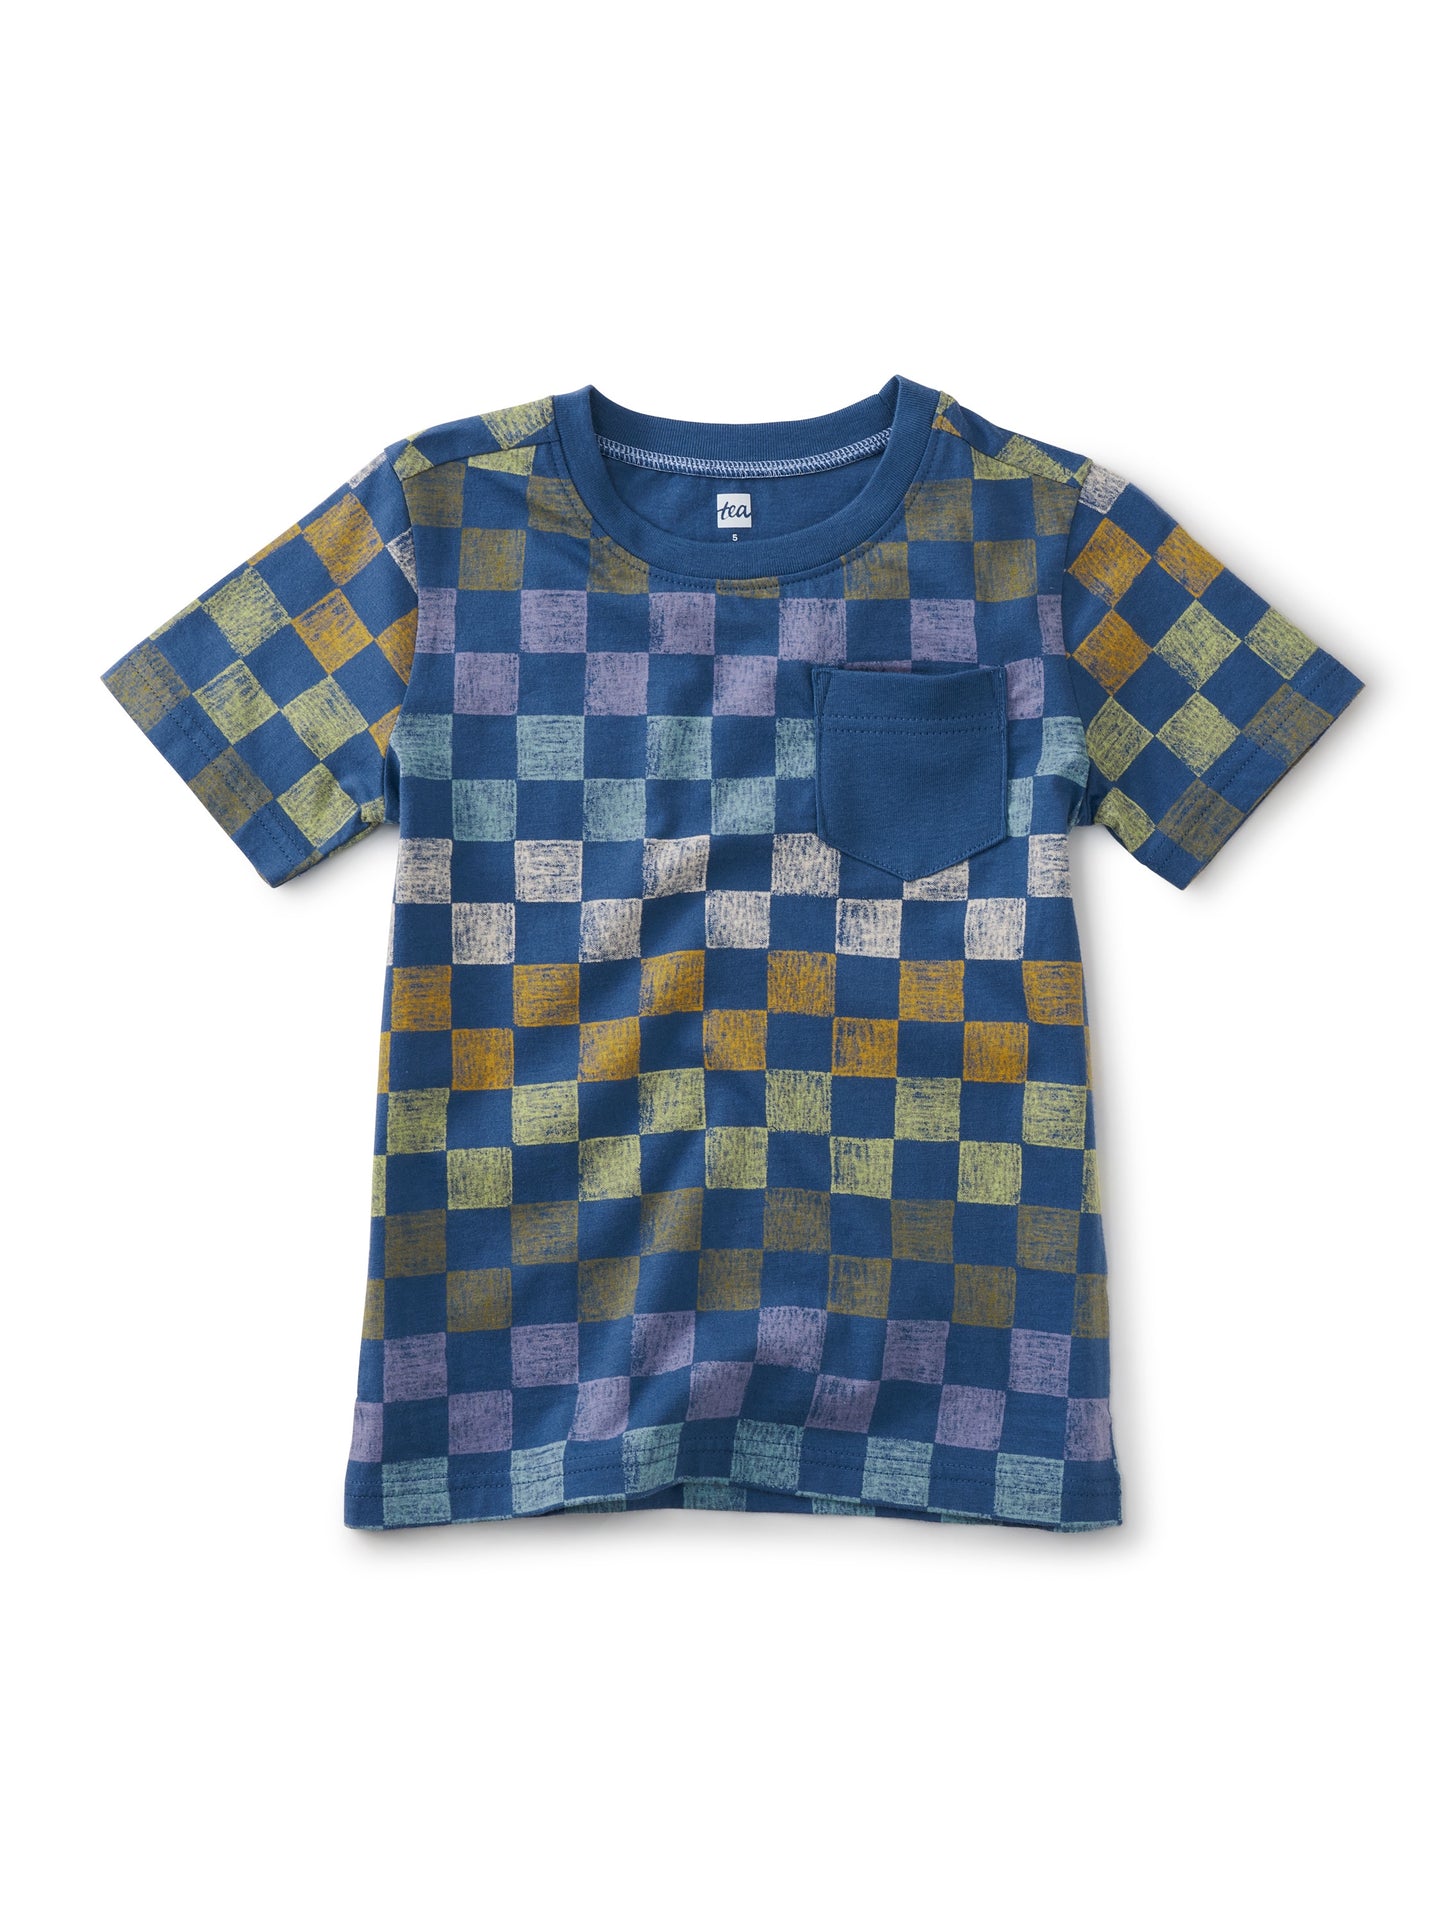 Tea Collection - Printed Pocket Tee - Checkerboard in Blue